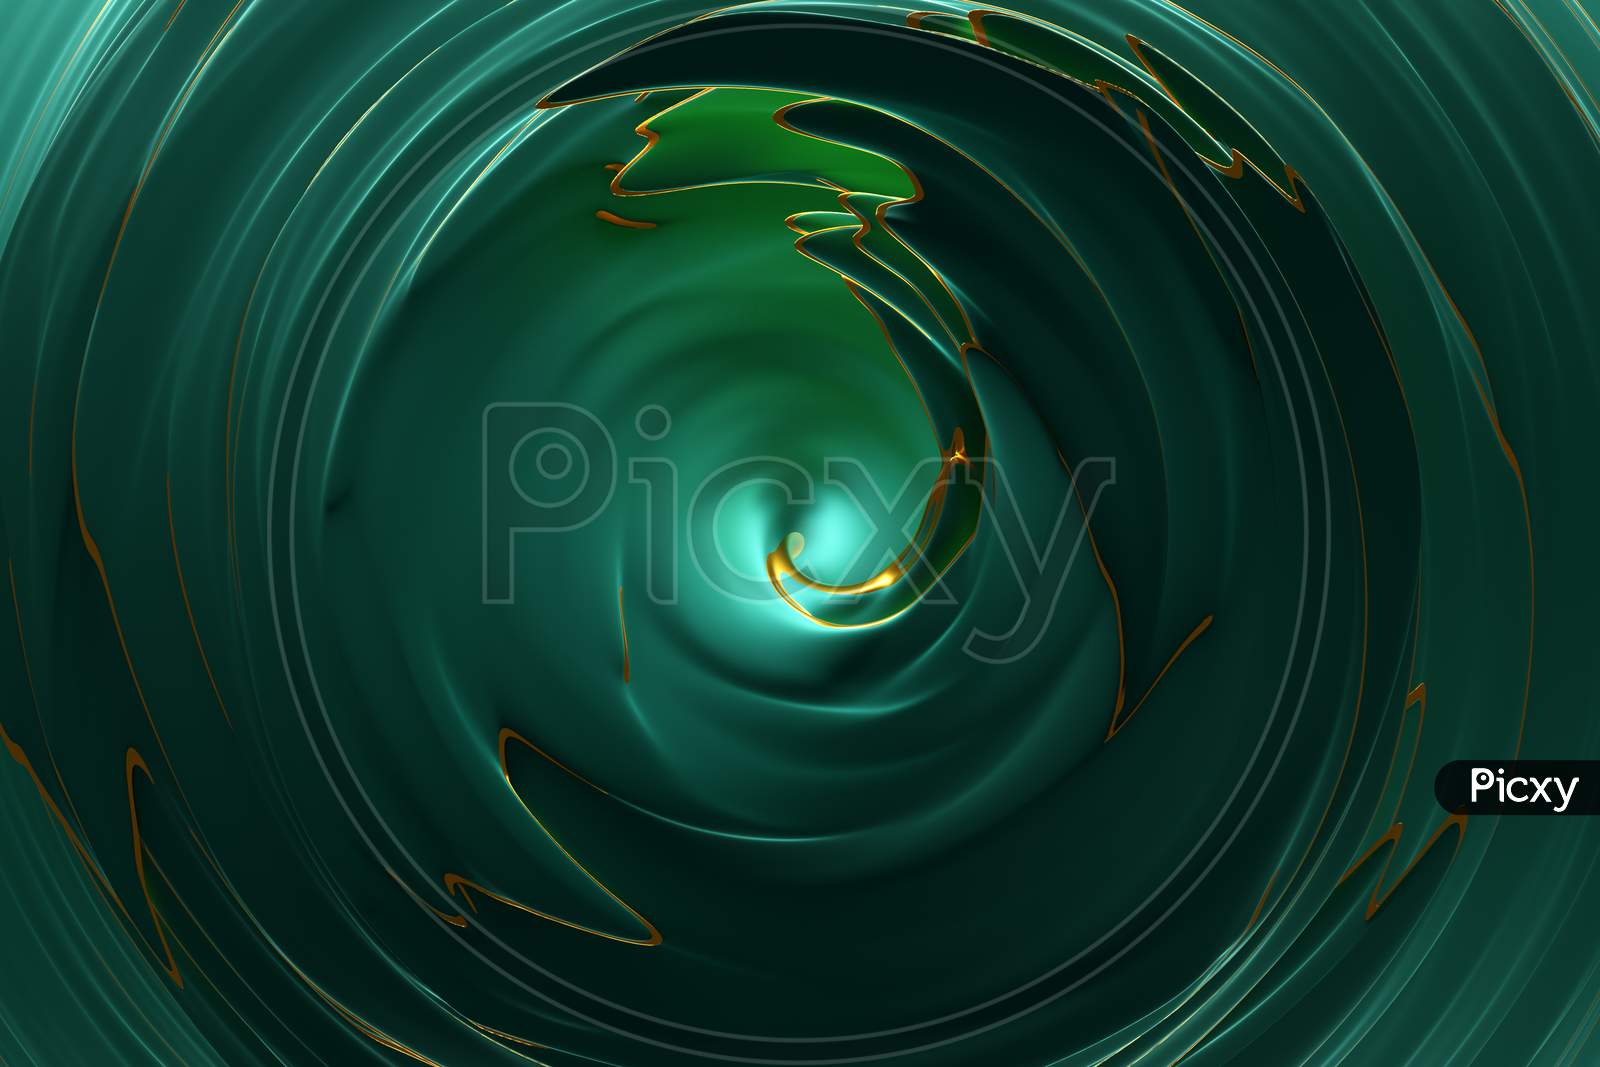 3D Illustration Of A Abstract Green Background With Scintillating Circles And Gloss. Illustration Beautiful. Abstract Background With Twirl Effect In Green